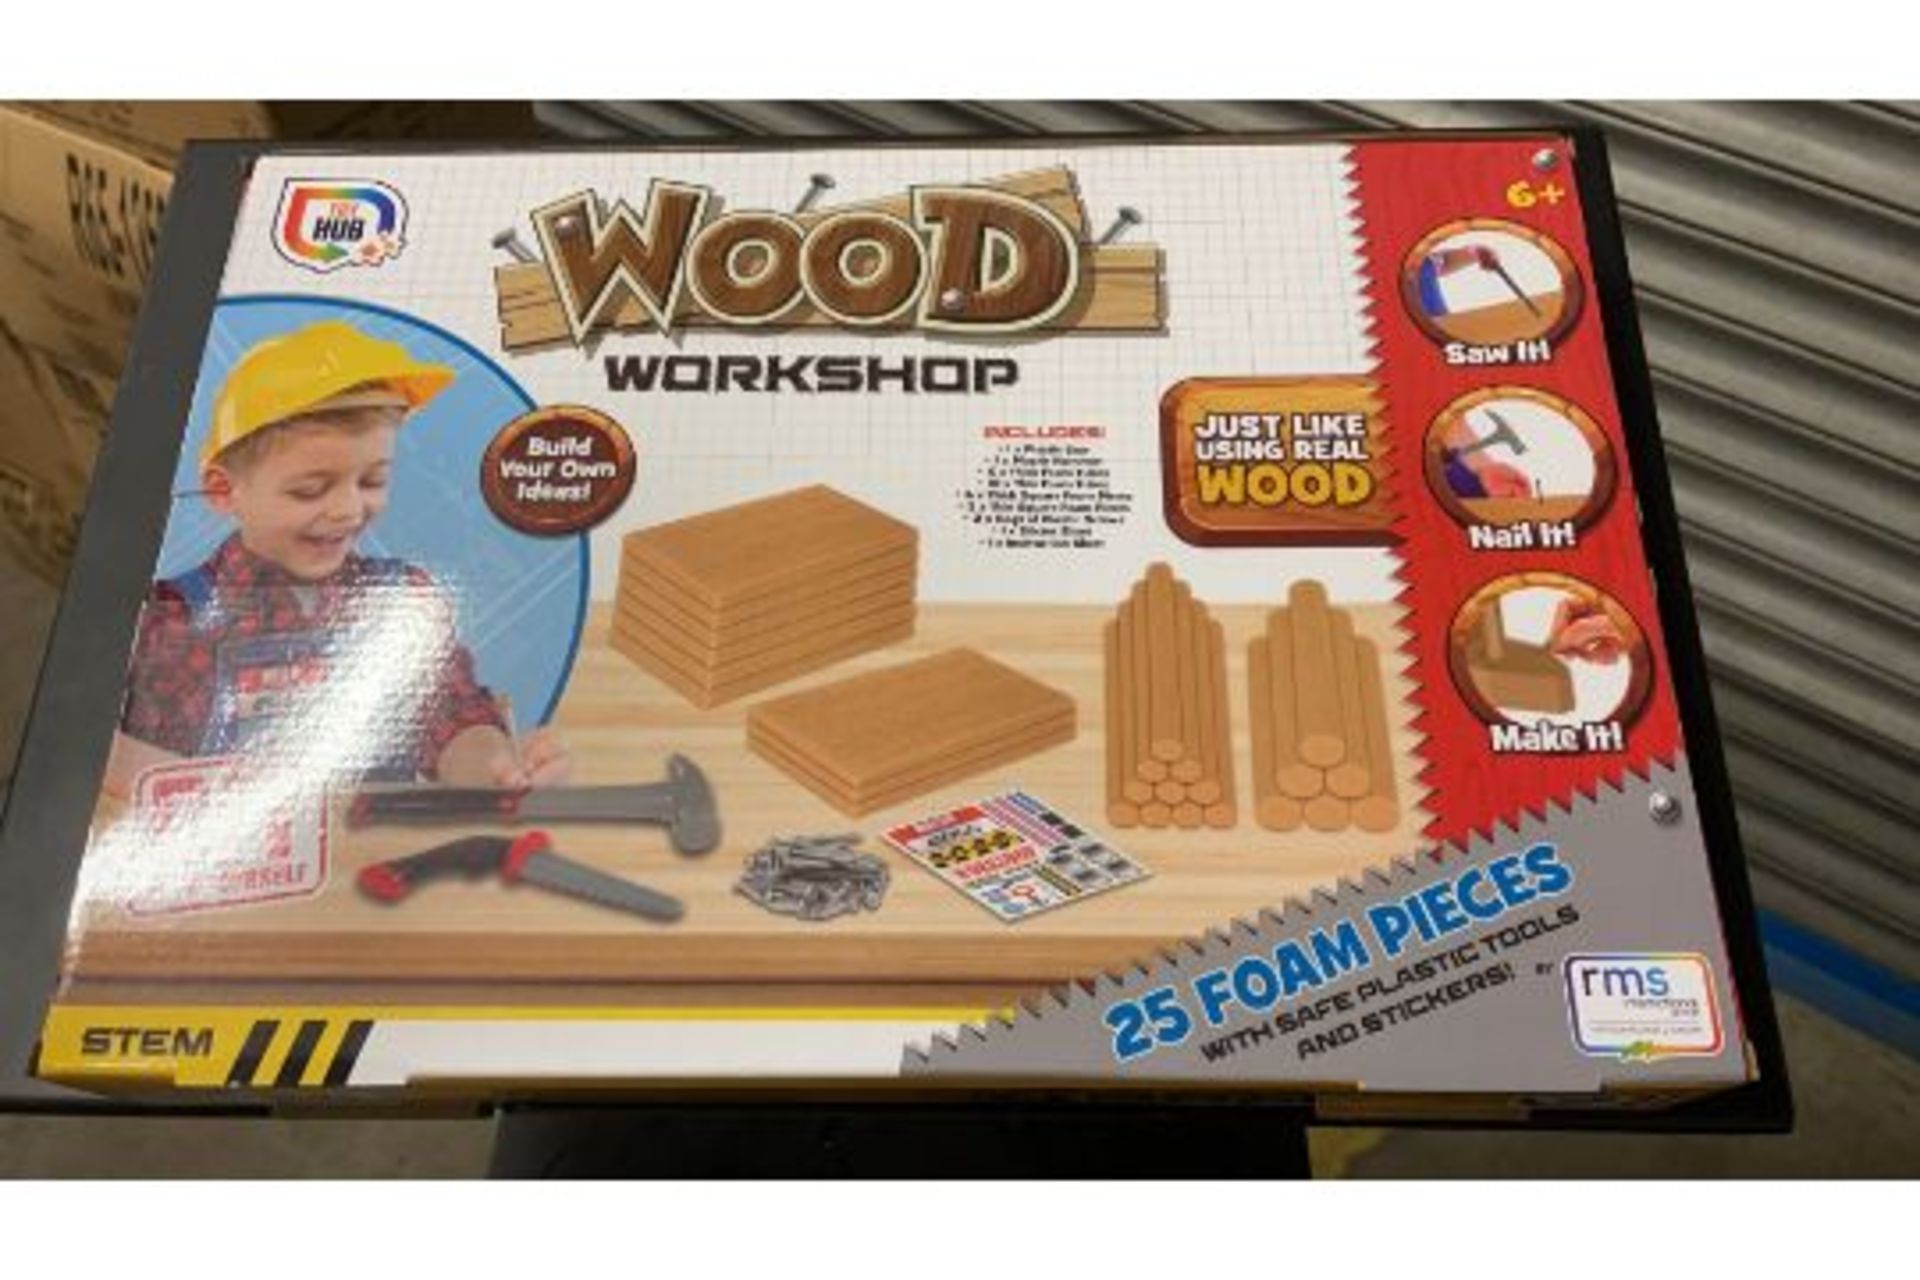 NEW 25PC WOOD WORKSHOP WITH FOAM PIECES, PLASTIC TOOLS AND STICKERS INCLUDED